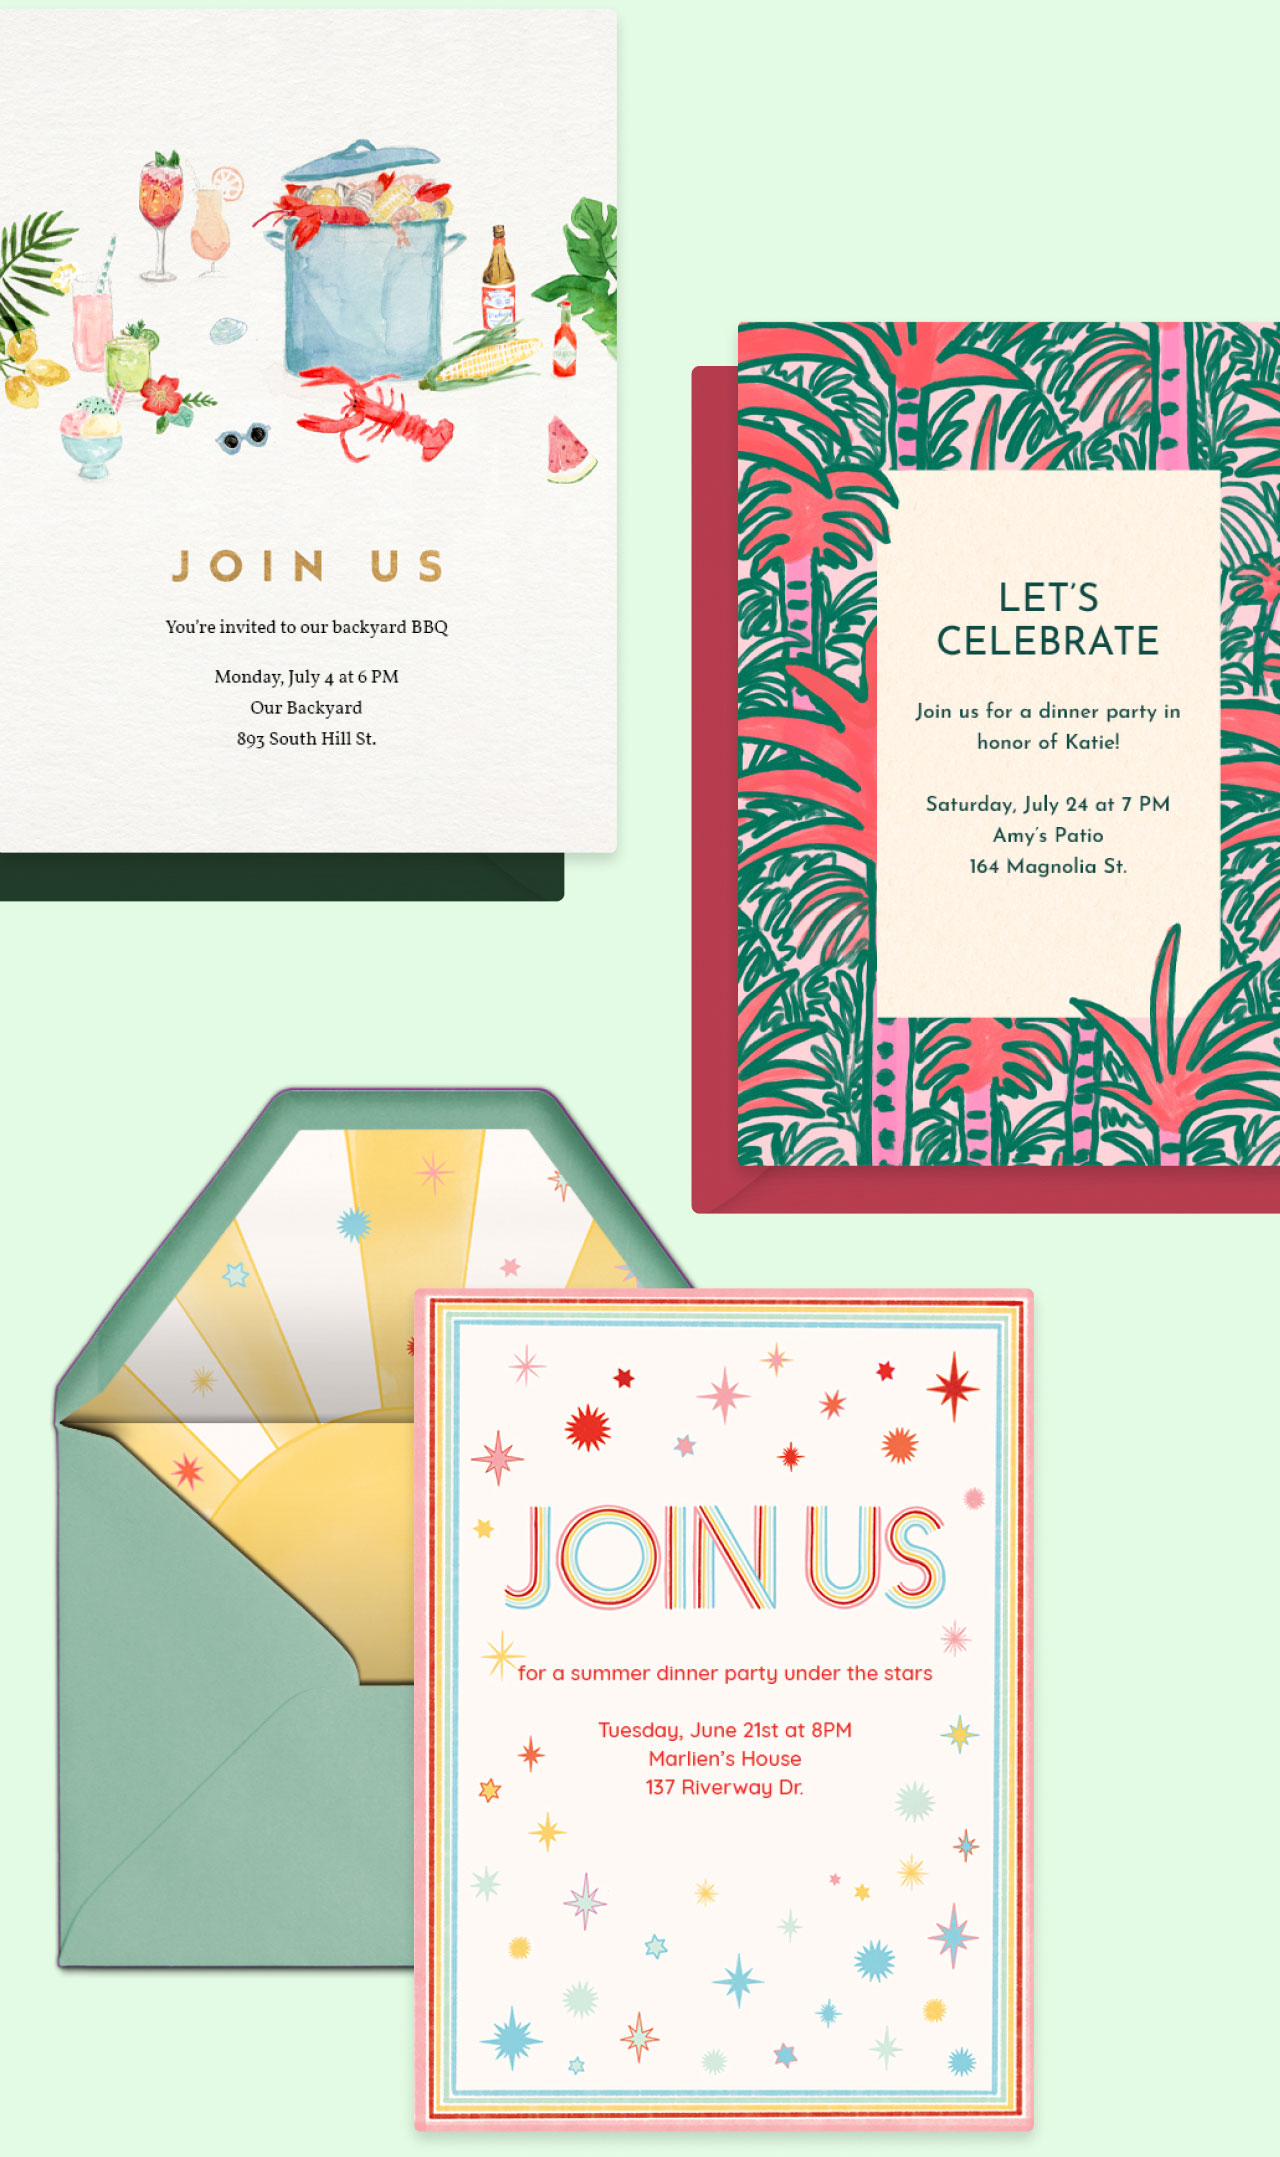 Dinner party invitations